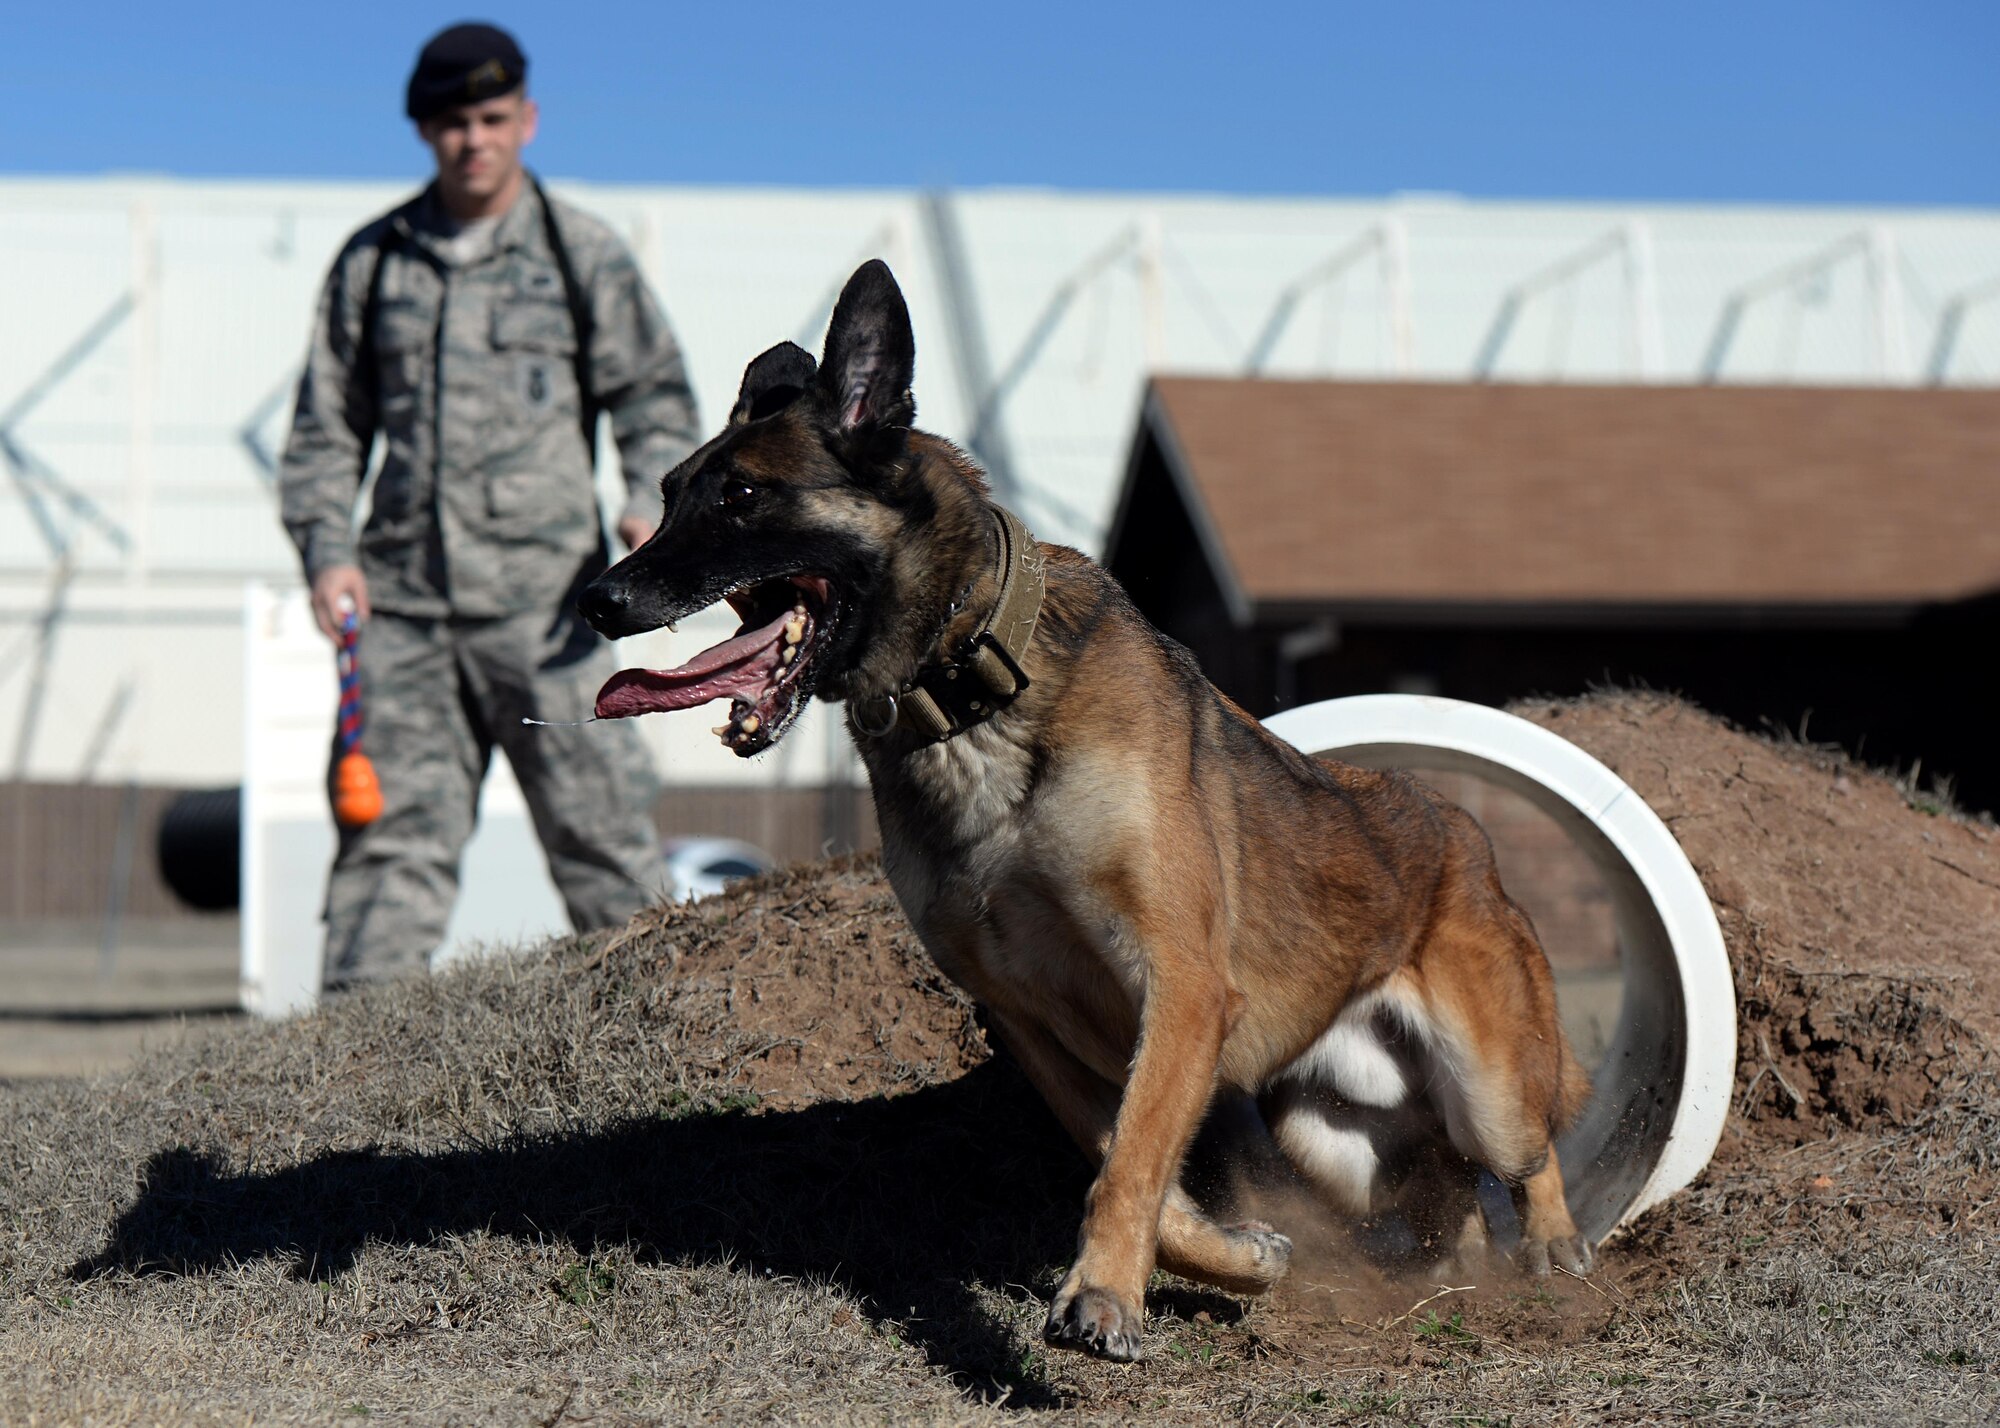 Yyoda, a U.S. Air Force military working dog, runs through a buried tunnel as part of obstacle course training with his handler, U.S. Air Force Staff Sgt. Justin Ridenour, 97th Security Forces Squadron working dog handler, at Altus Air Force Base, Oklahoma, Feb. 10, 2015. The obstacle course consists of a suspended tunnel, a buried tunnel, stairs, an A-frame, a catwalk and three hurdles. The purpose of the obstacle course is to put the canines in situations that other dogs may not normally experience. It gets them out of their comfort zone so they are more likely to chase a perpetrator, or accompany their handler through dangerous or unusual terrain. (U.S. Air Force photo by Airman 1st Class Megan E. Acs)